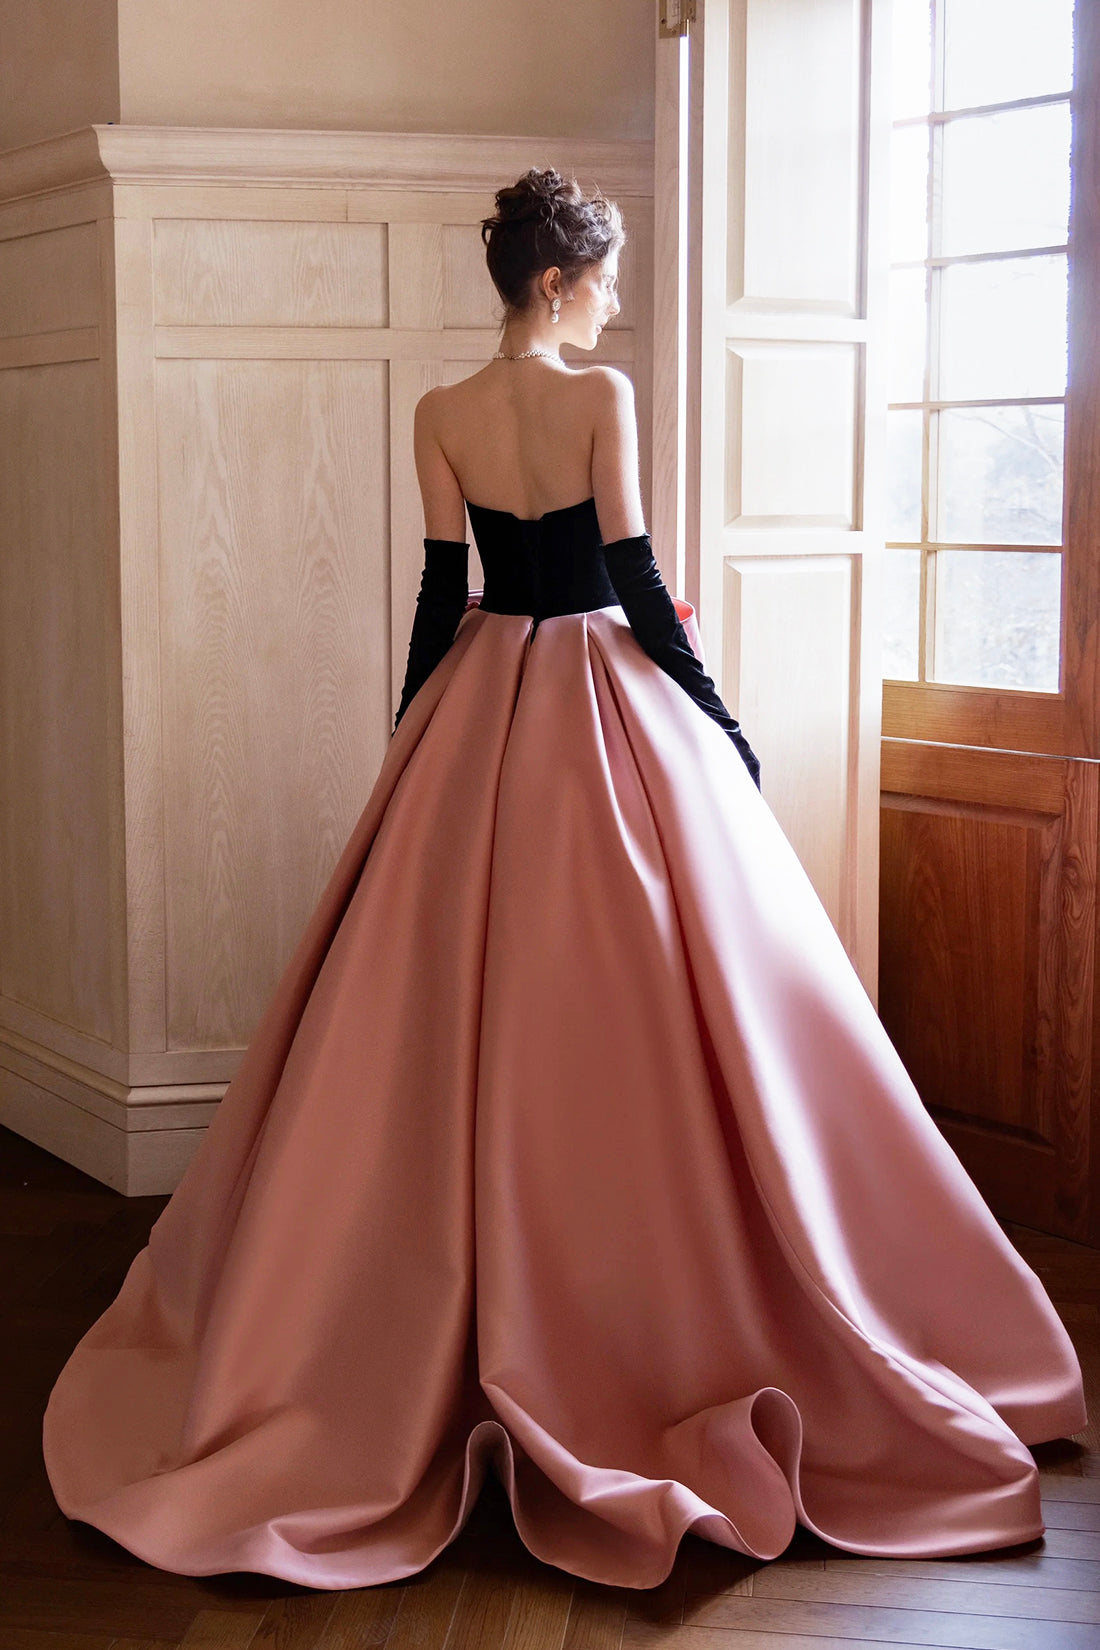 Black Velvet and Satin Long Formal Dress, Beautiful Strapless Evening Party Dress with Bow